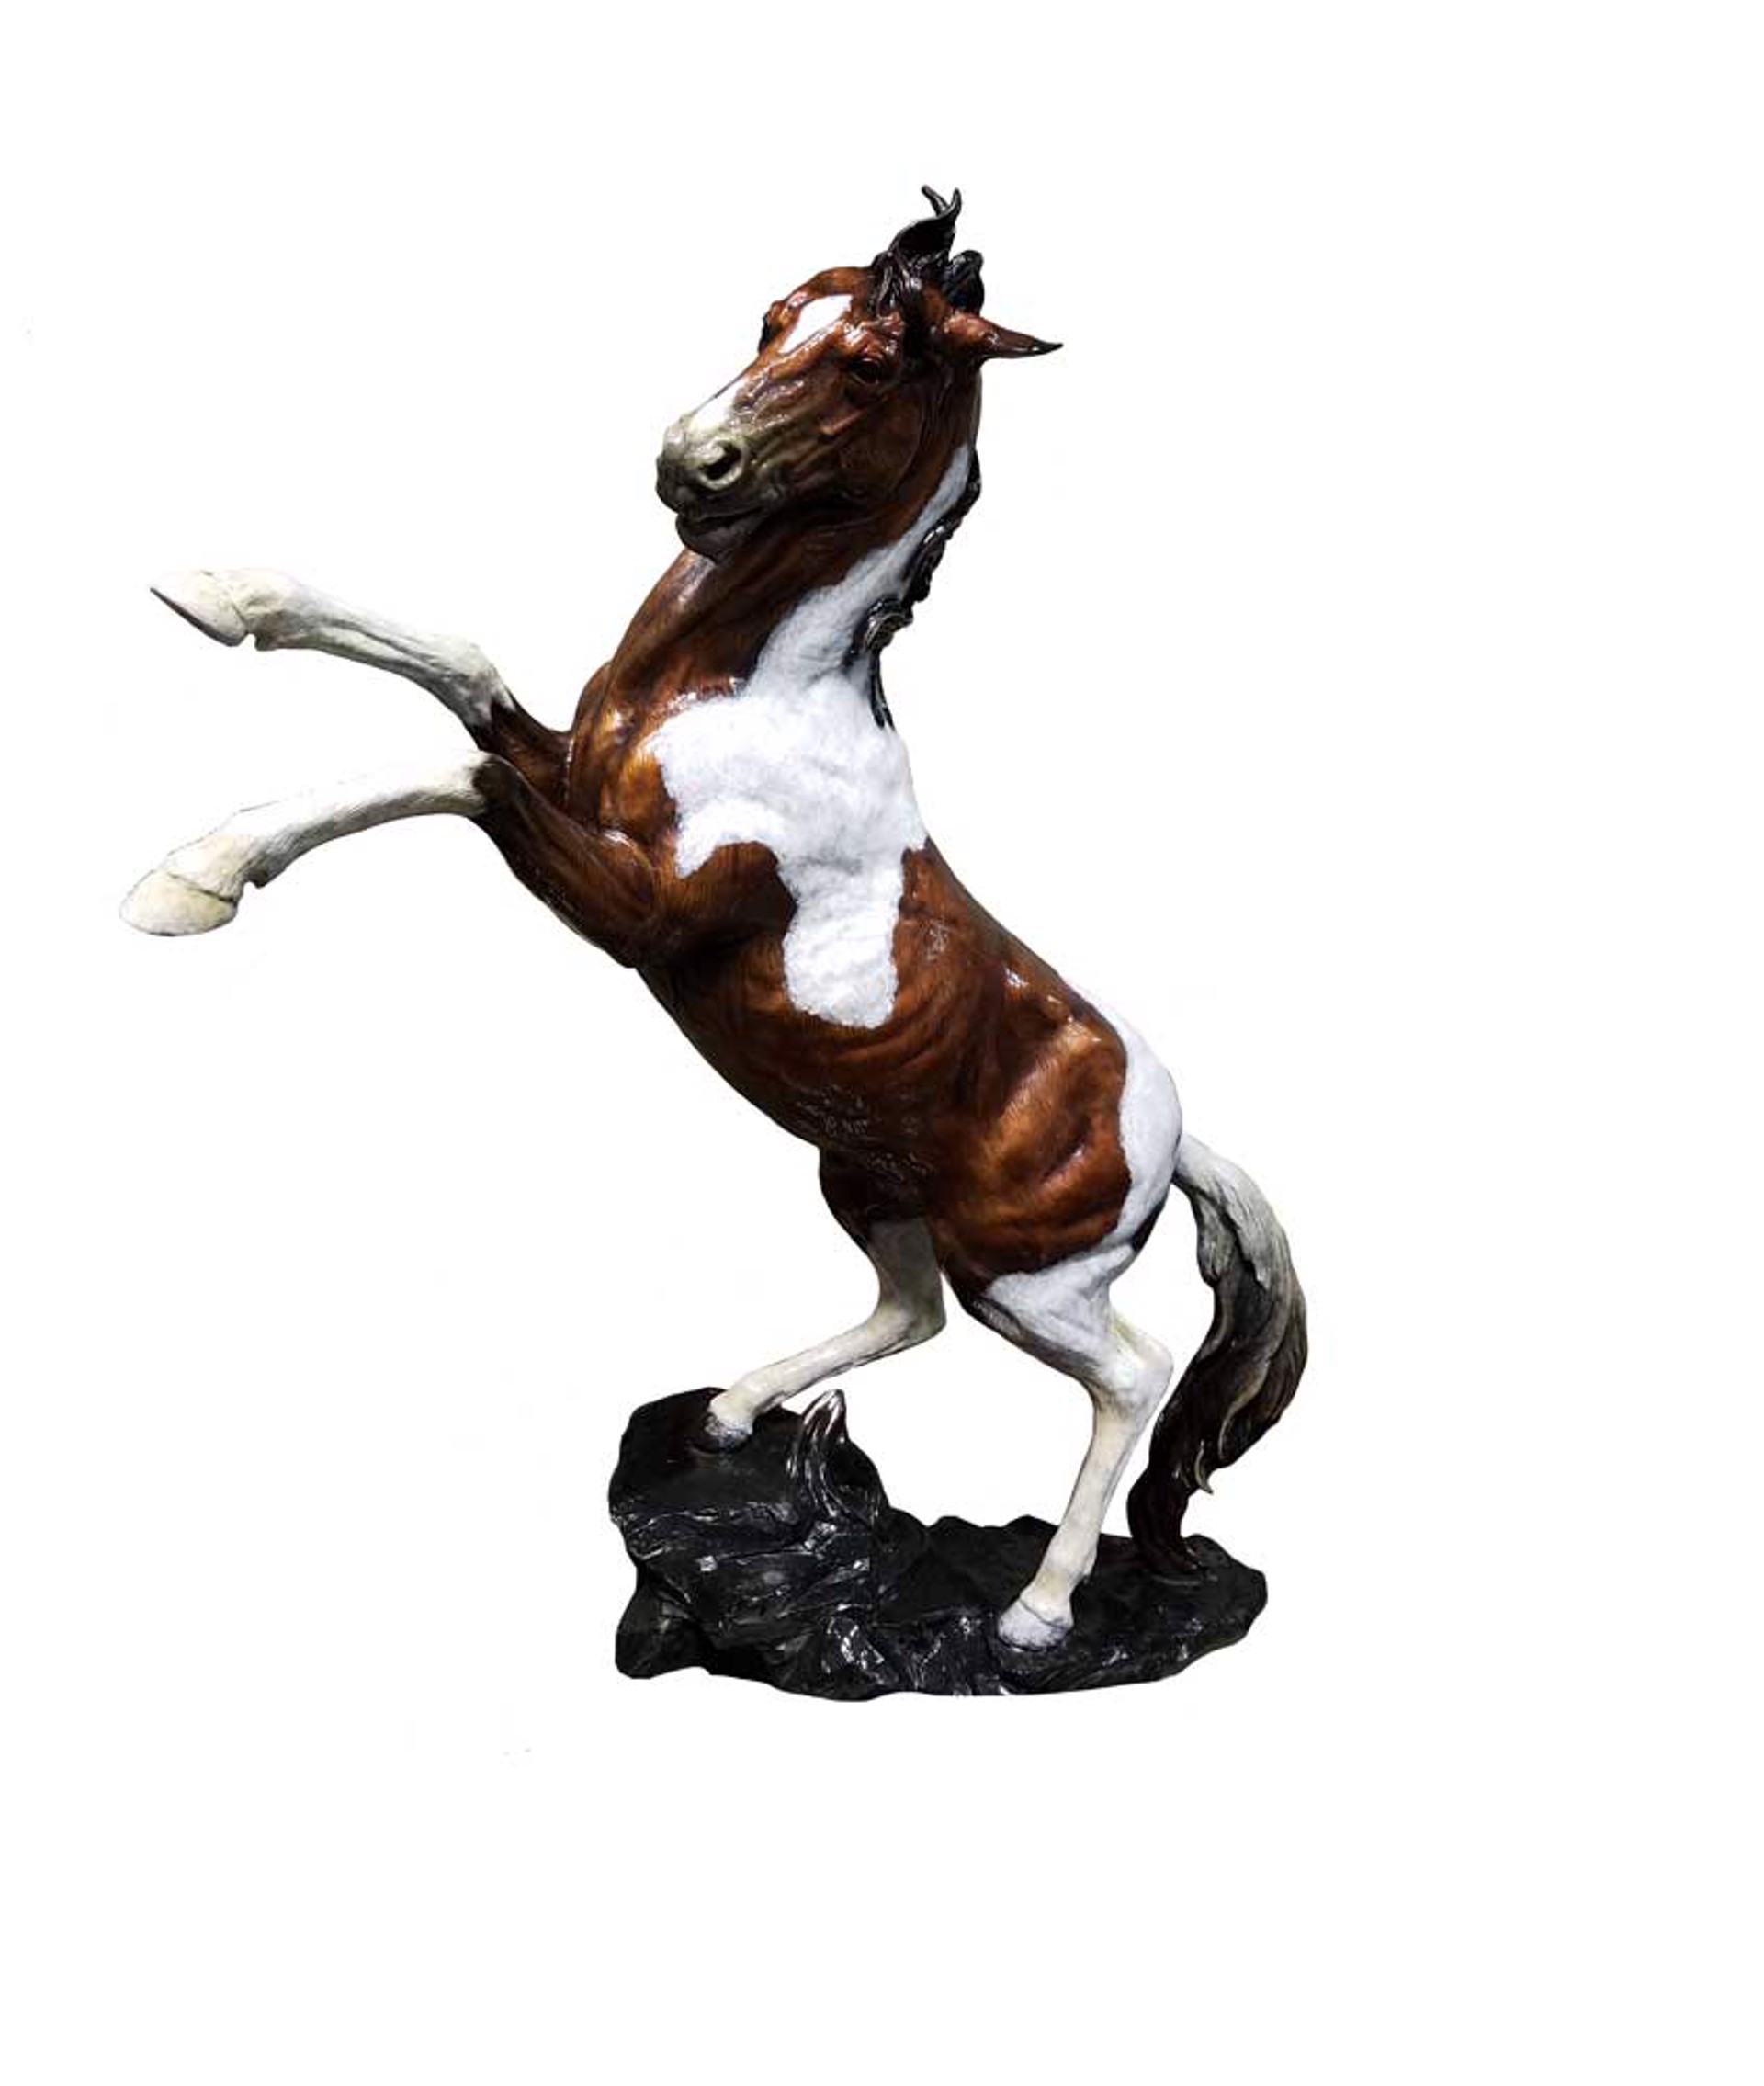 A Bronze Sculpture Of A Rearing Mustang Paint Horse By Rip And Alison Caswell Available At Gallery Wild